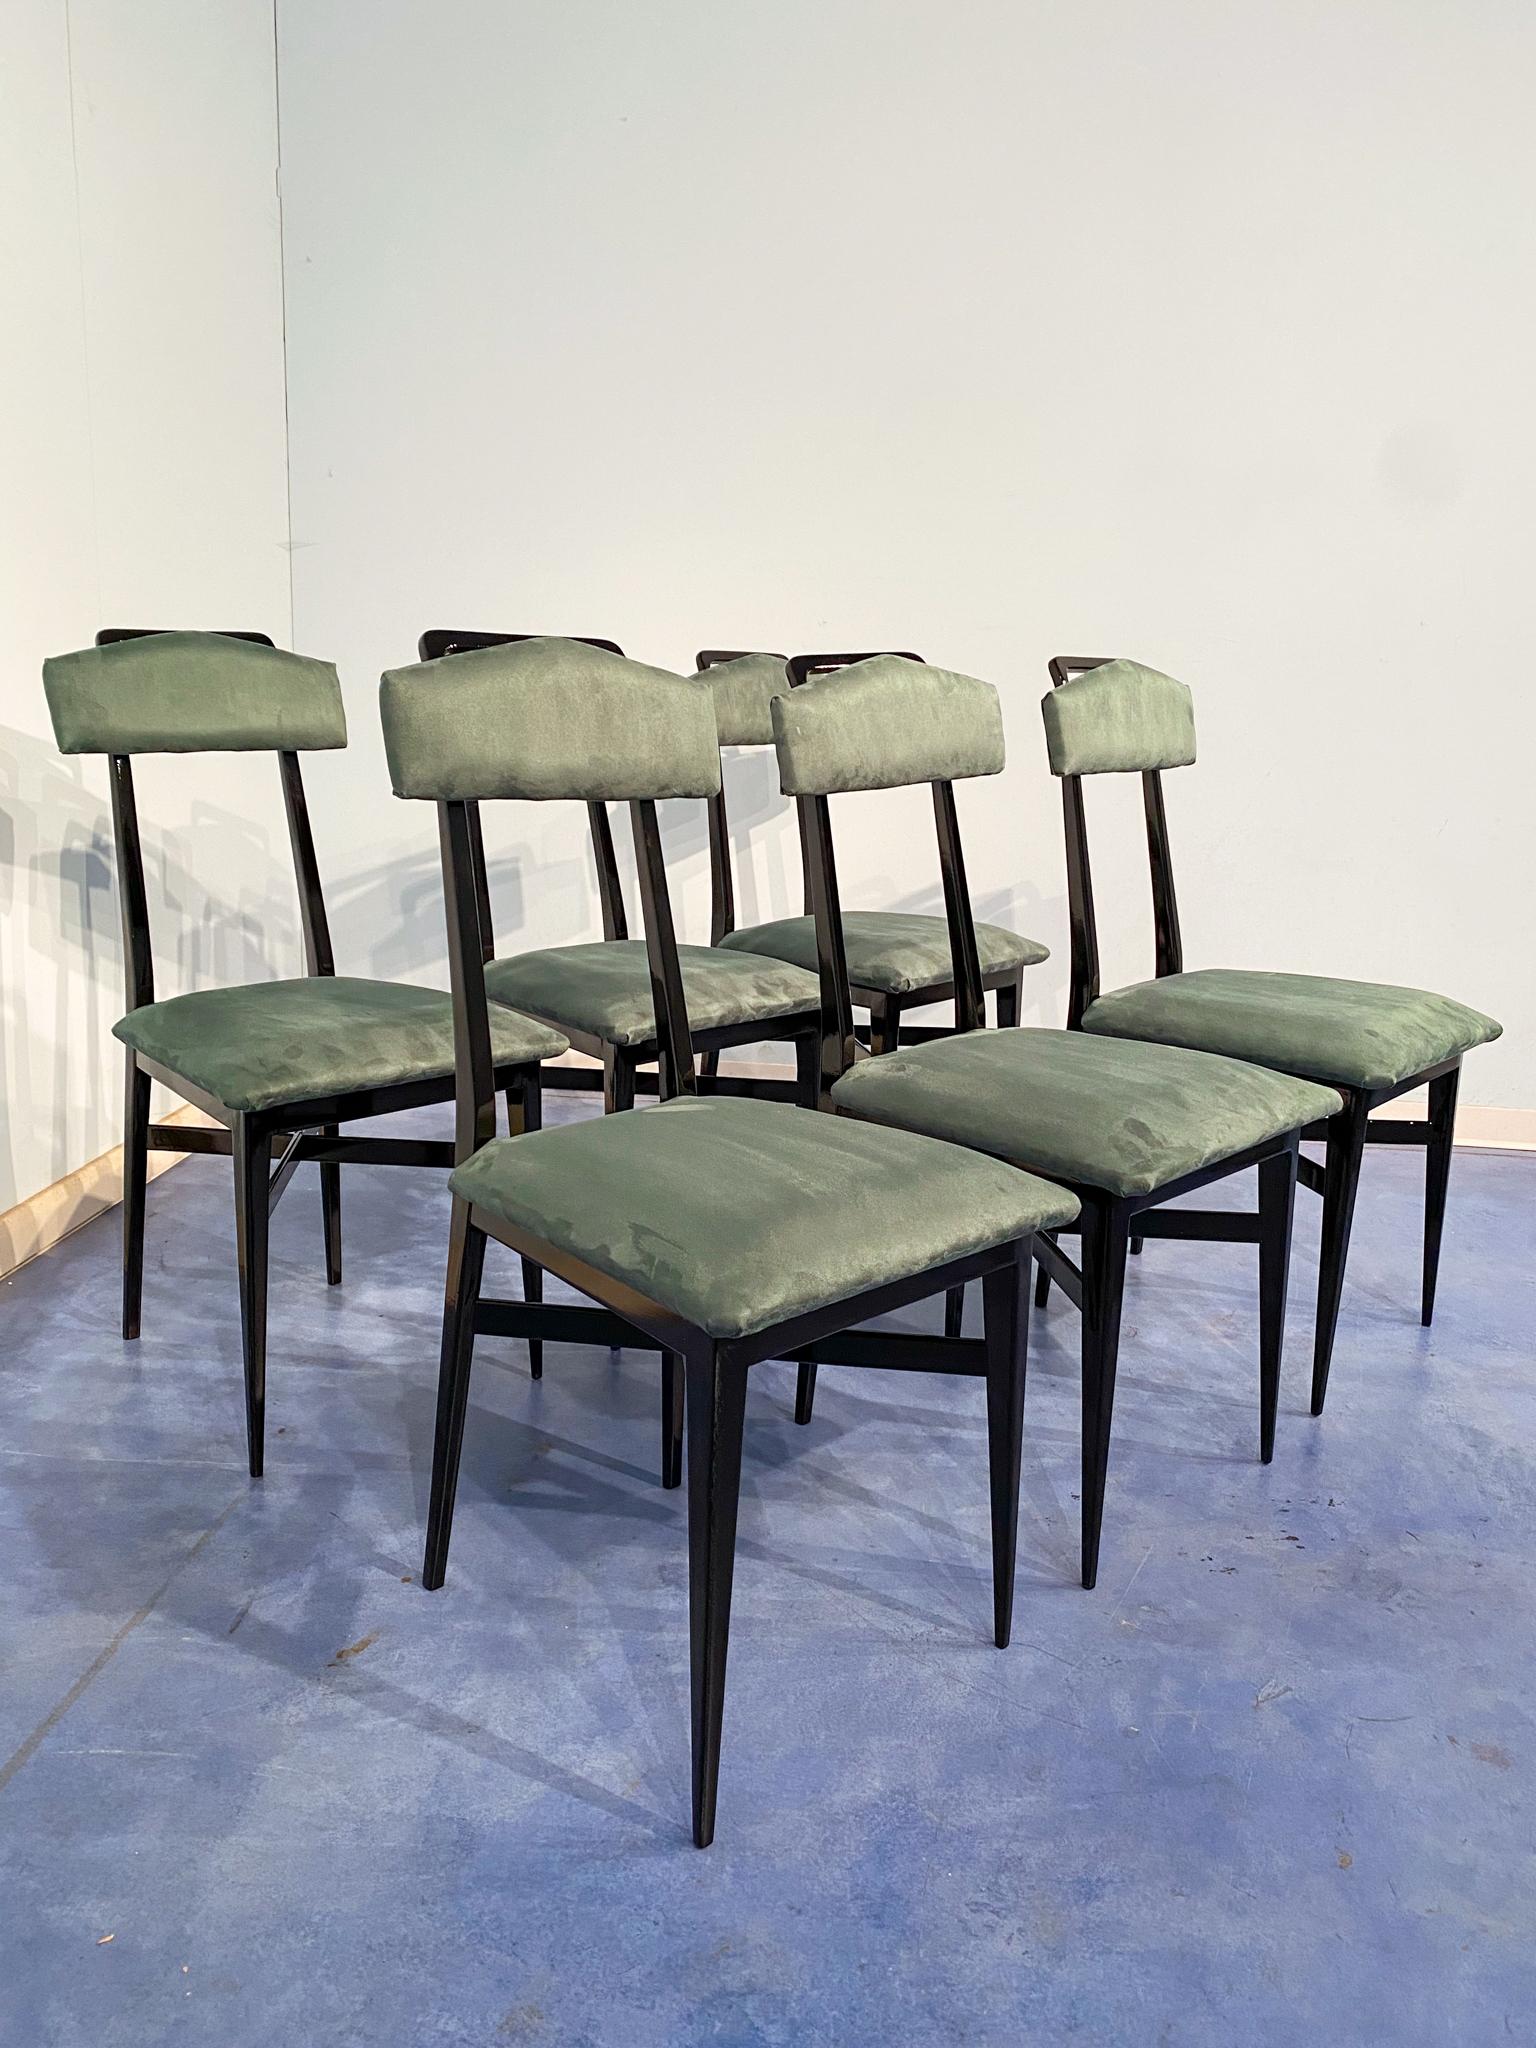 Italian Mid-Century Black and Green Color Dining Chairs, Set of Six, 1950s For Sale 7